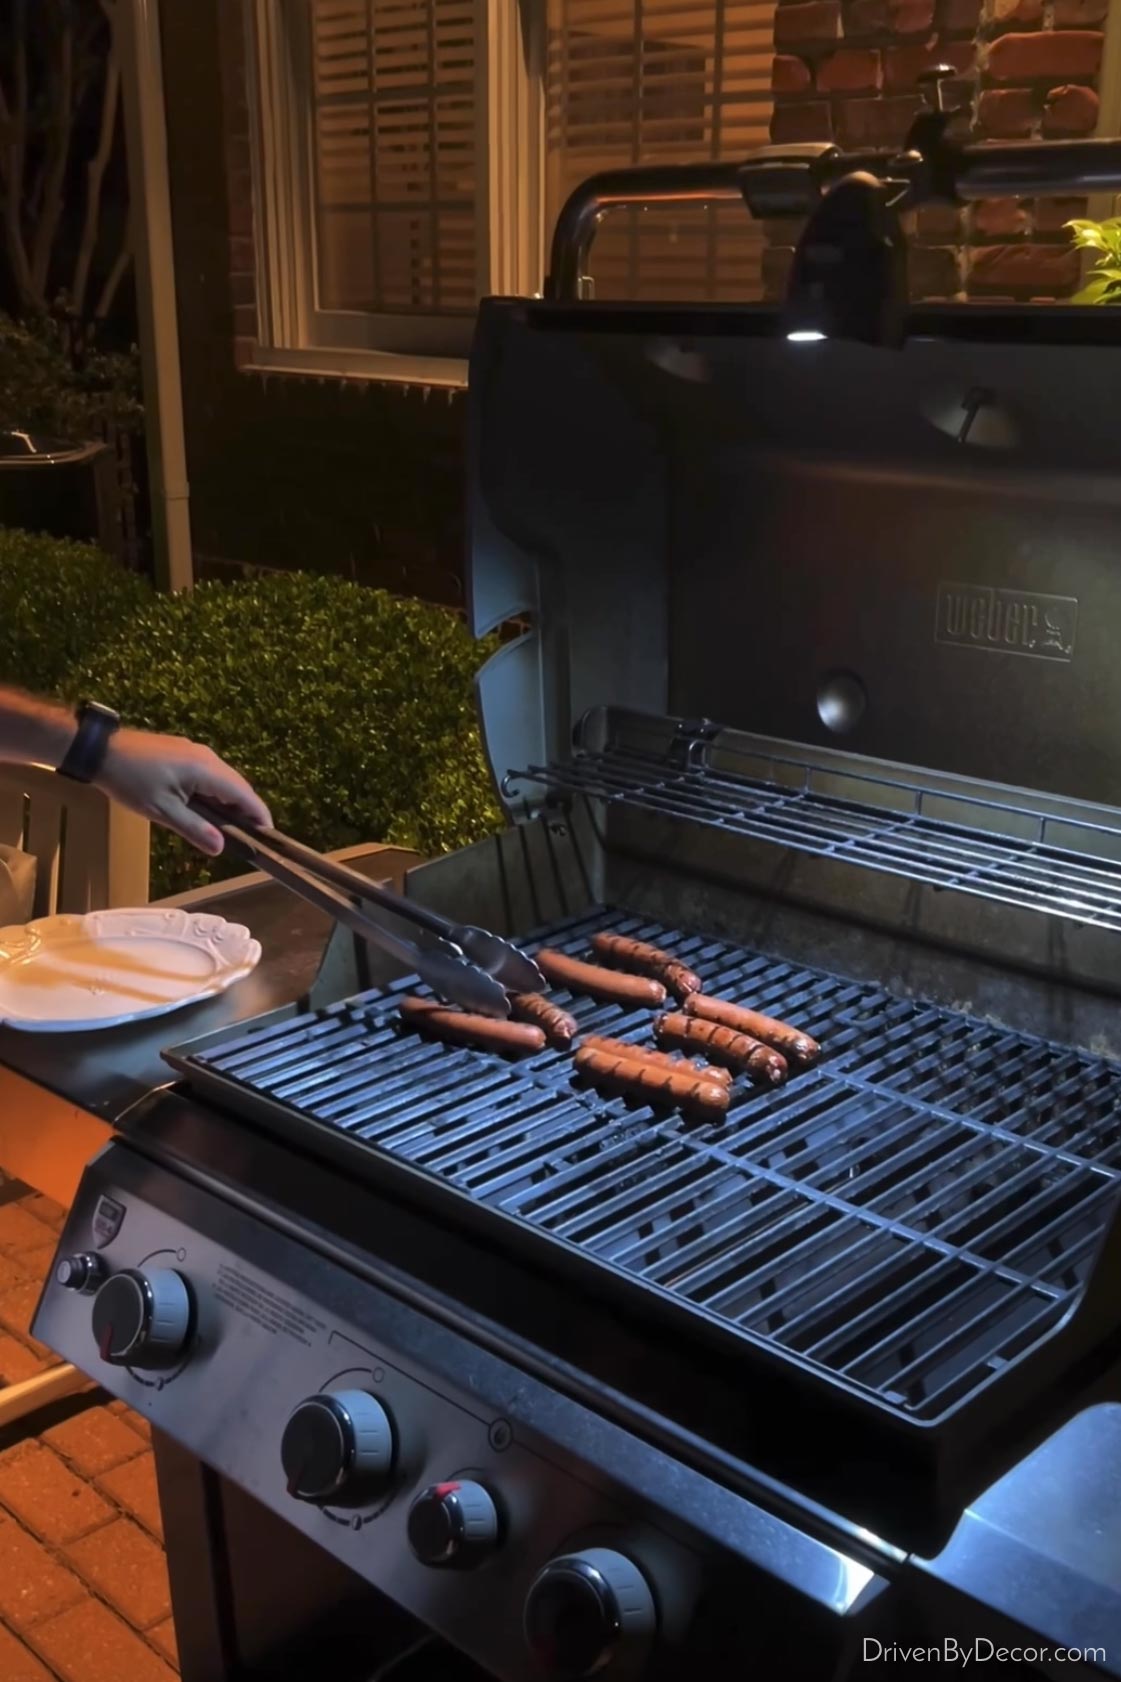 Super bright grill light that clamps on the grill handle - great Father's Day gift!